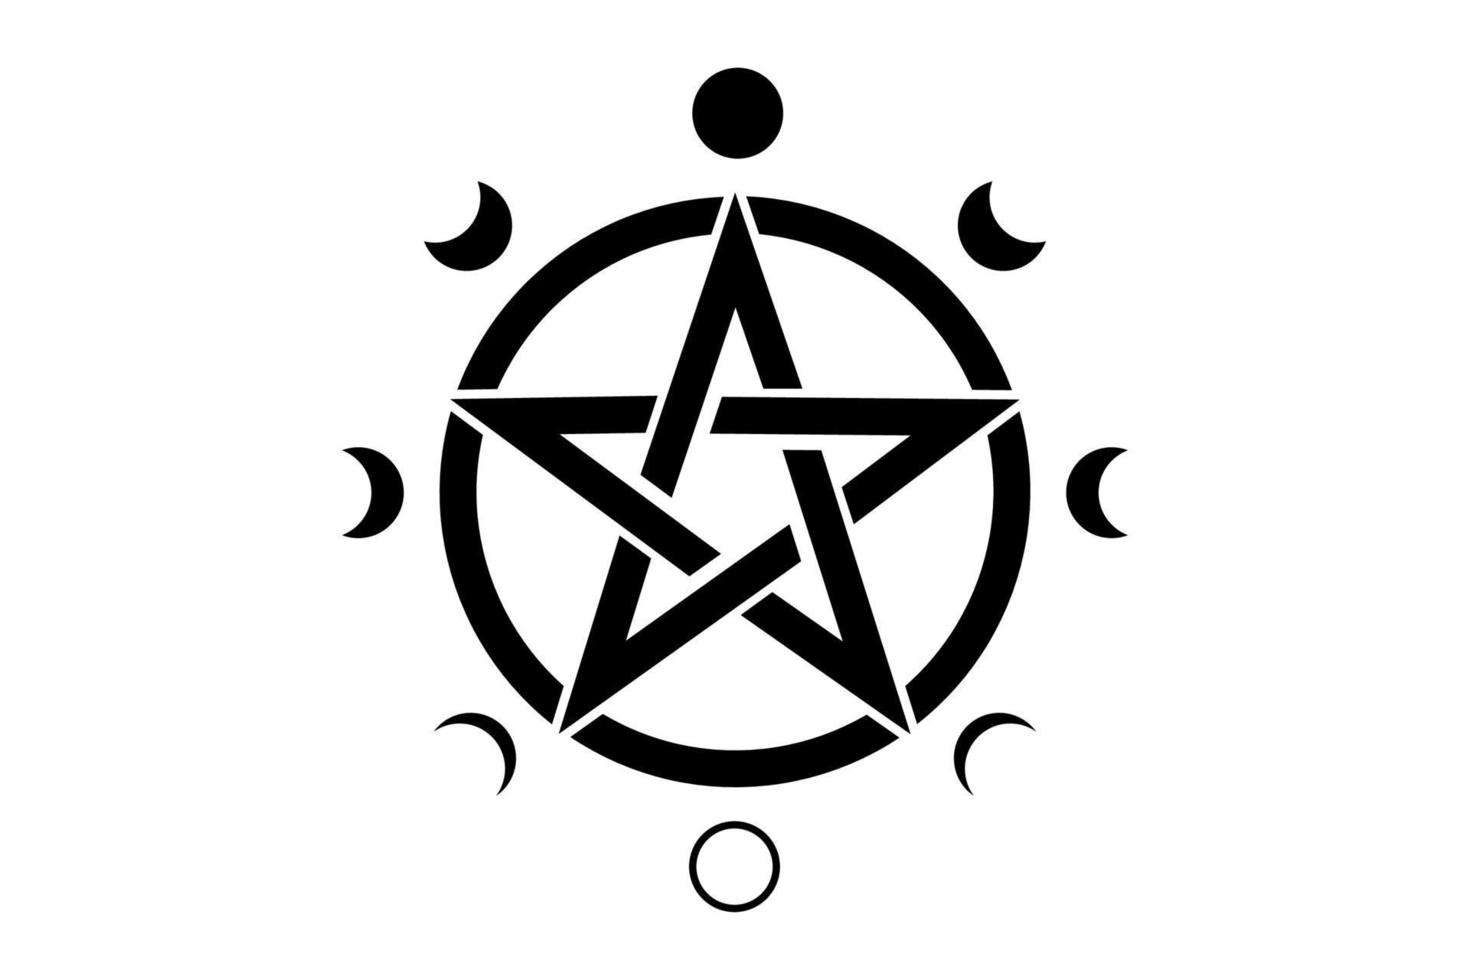 Pentacle circle symbol and Phases of the moon. Wiccan symbol vector